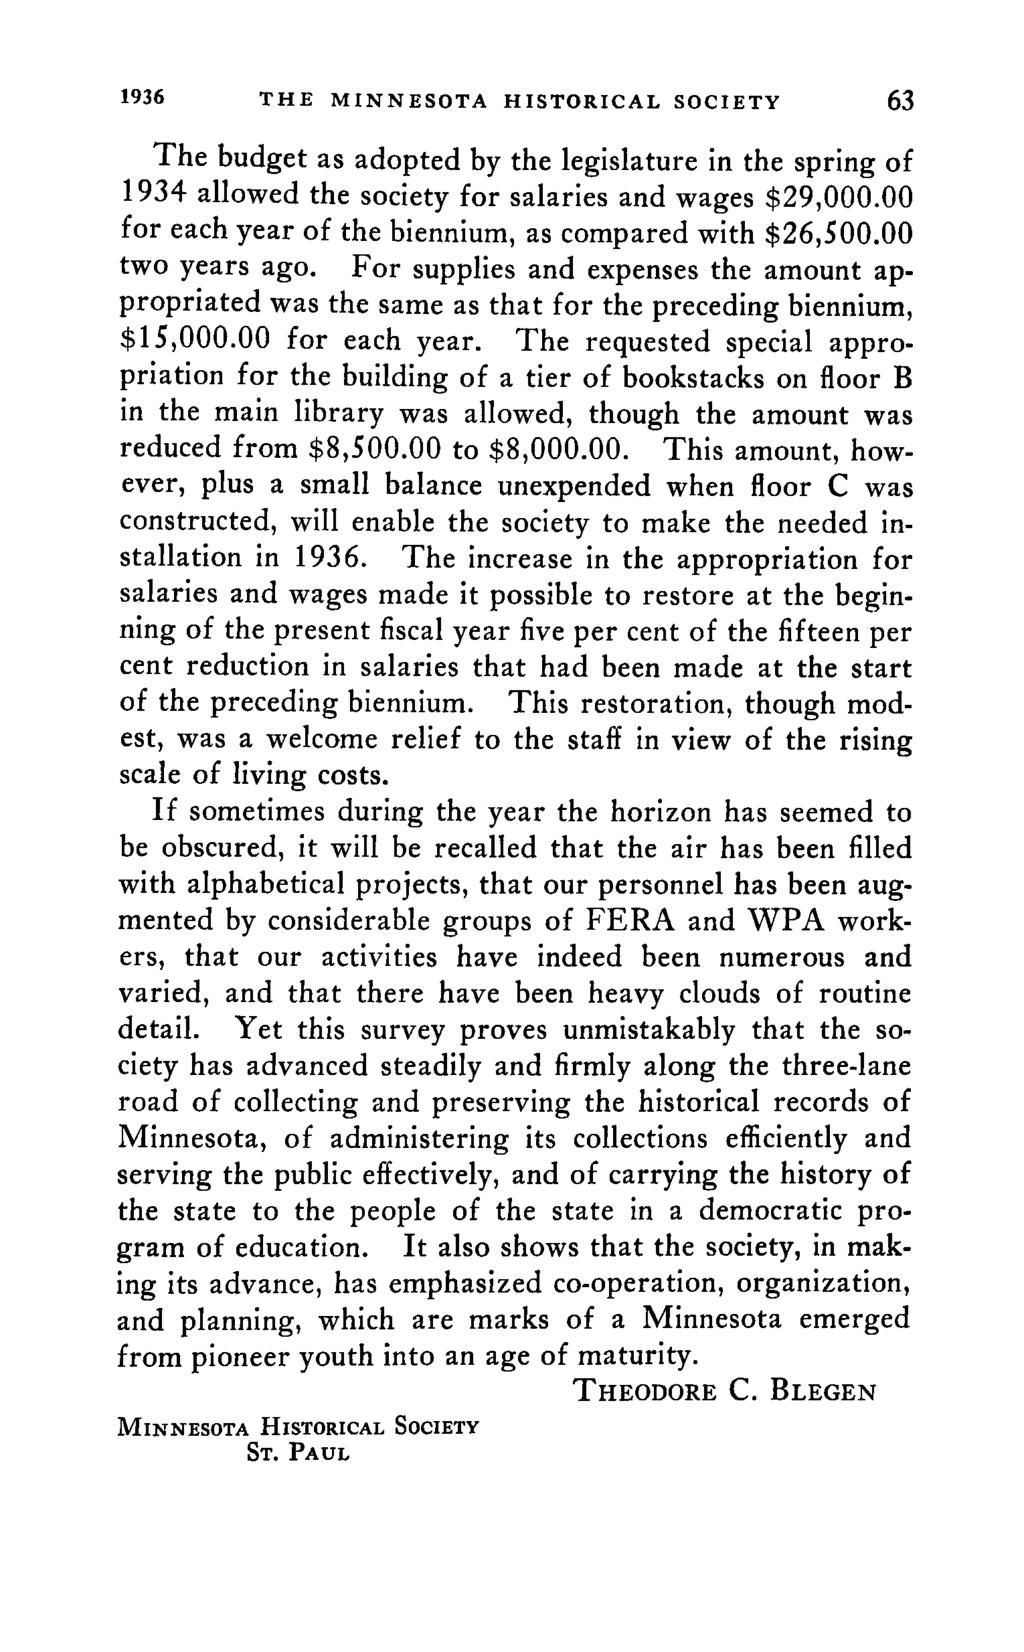 1936 THE MINNESOTA HISTORICAL SOCIETY 63 The budget as adopted by the legislature in the spring of 1934 auowed the society for salaries and wages $29,000.